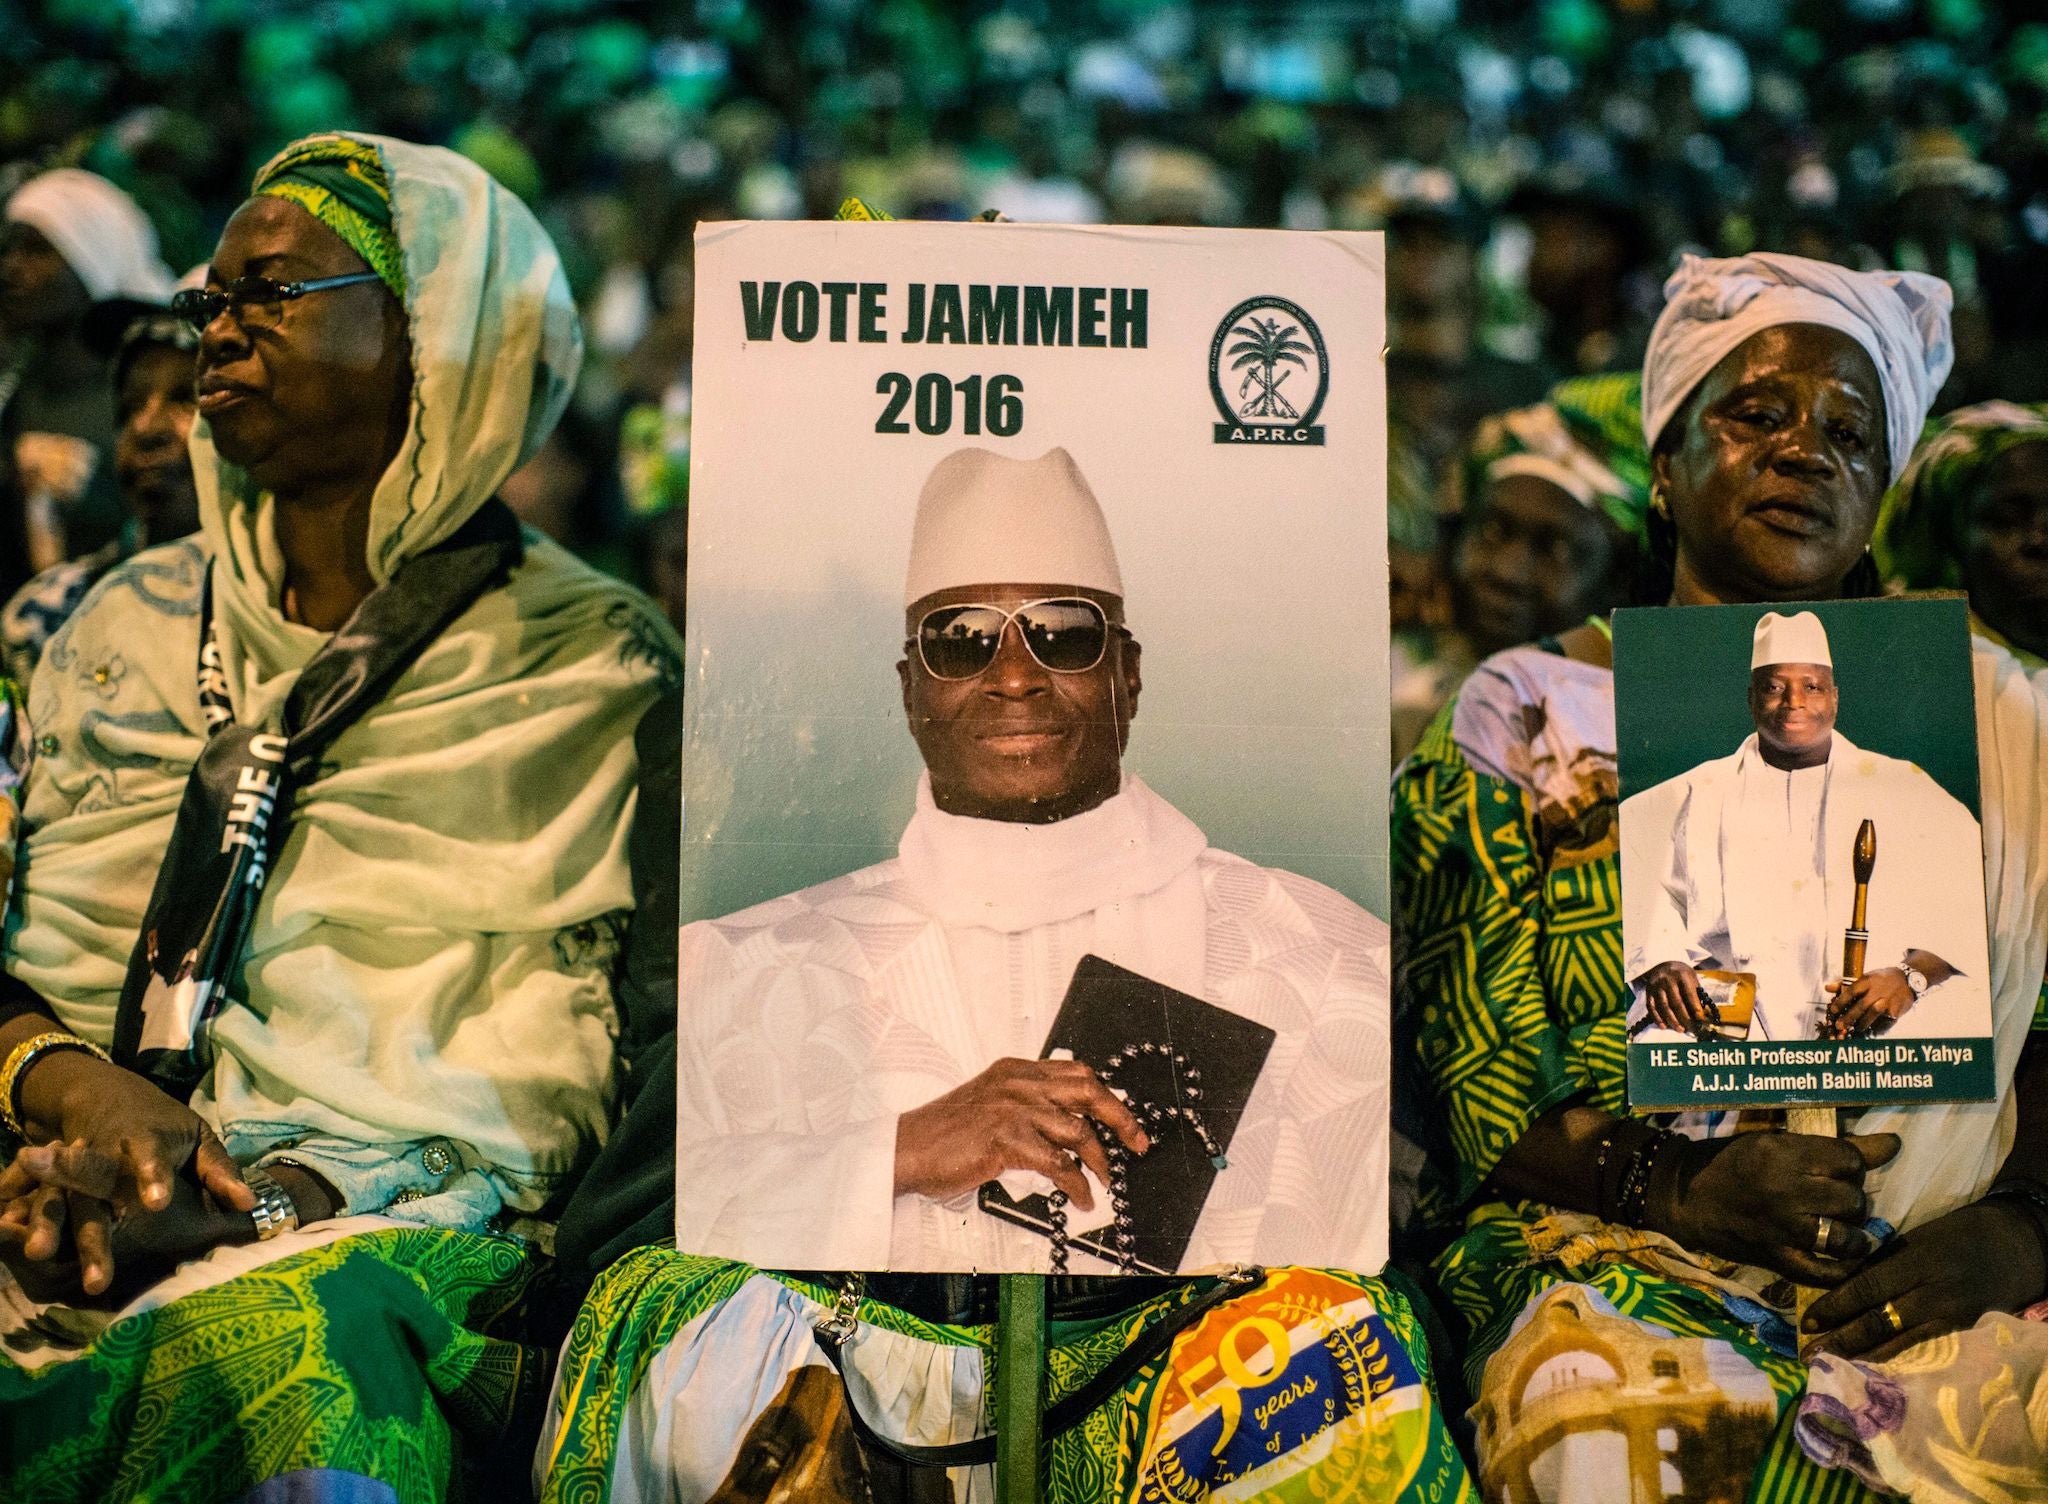 Supporters of Yahya Jammeh at a campaign rally during the election